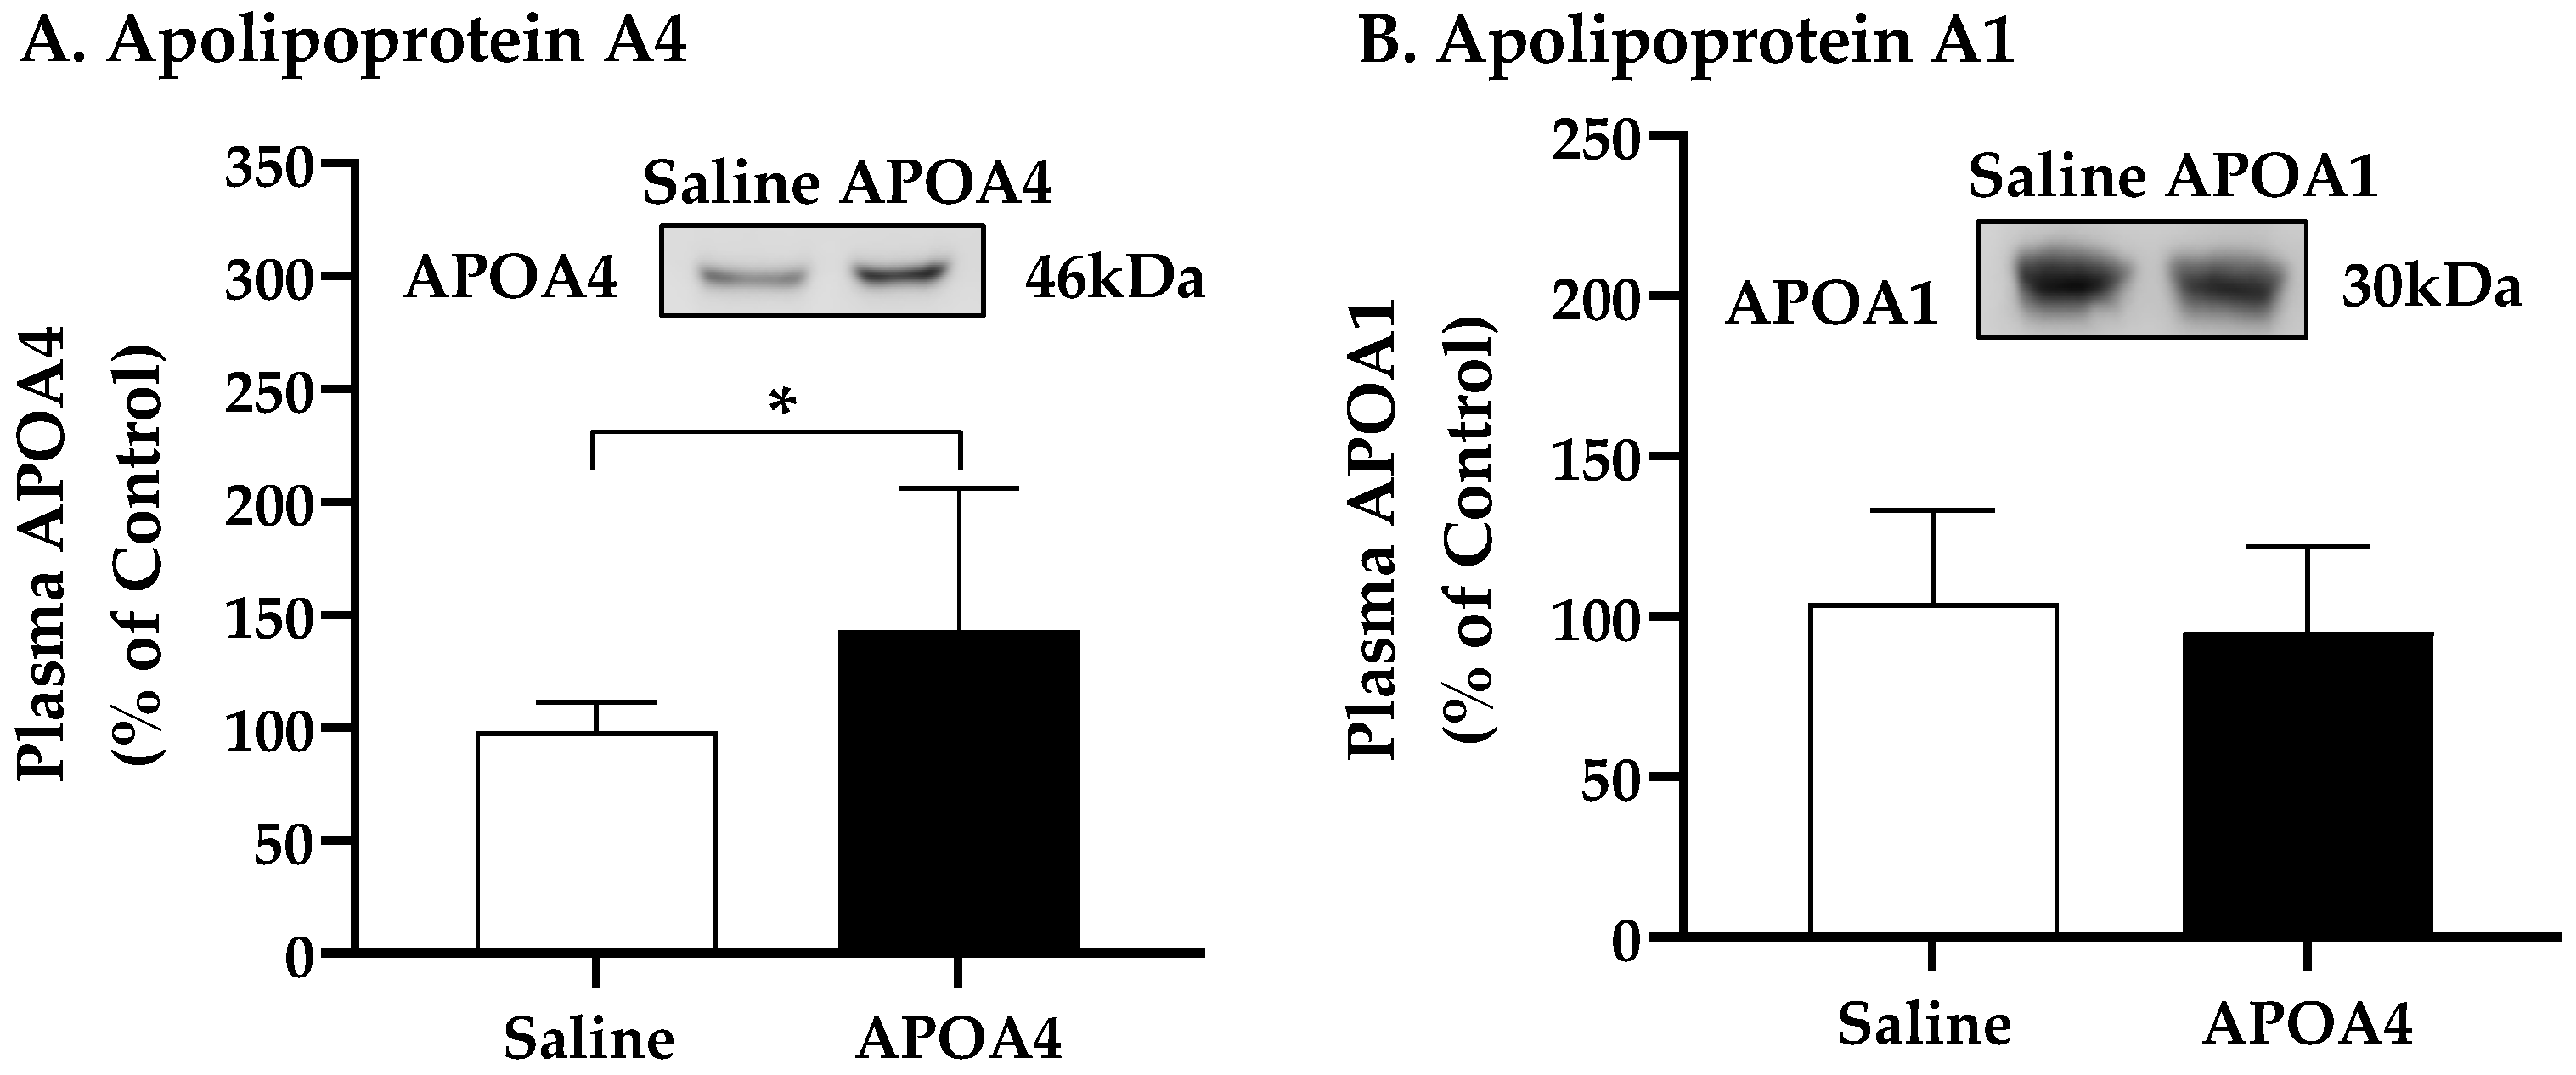 Nutrients | Free Full-Text | Apolipoprotein A4 Elevates Sympathetic  Activity and Thermogenesis in Male Mice